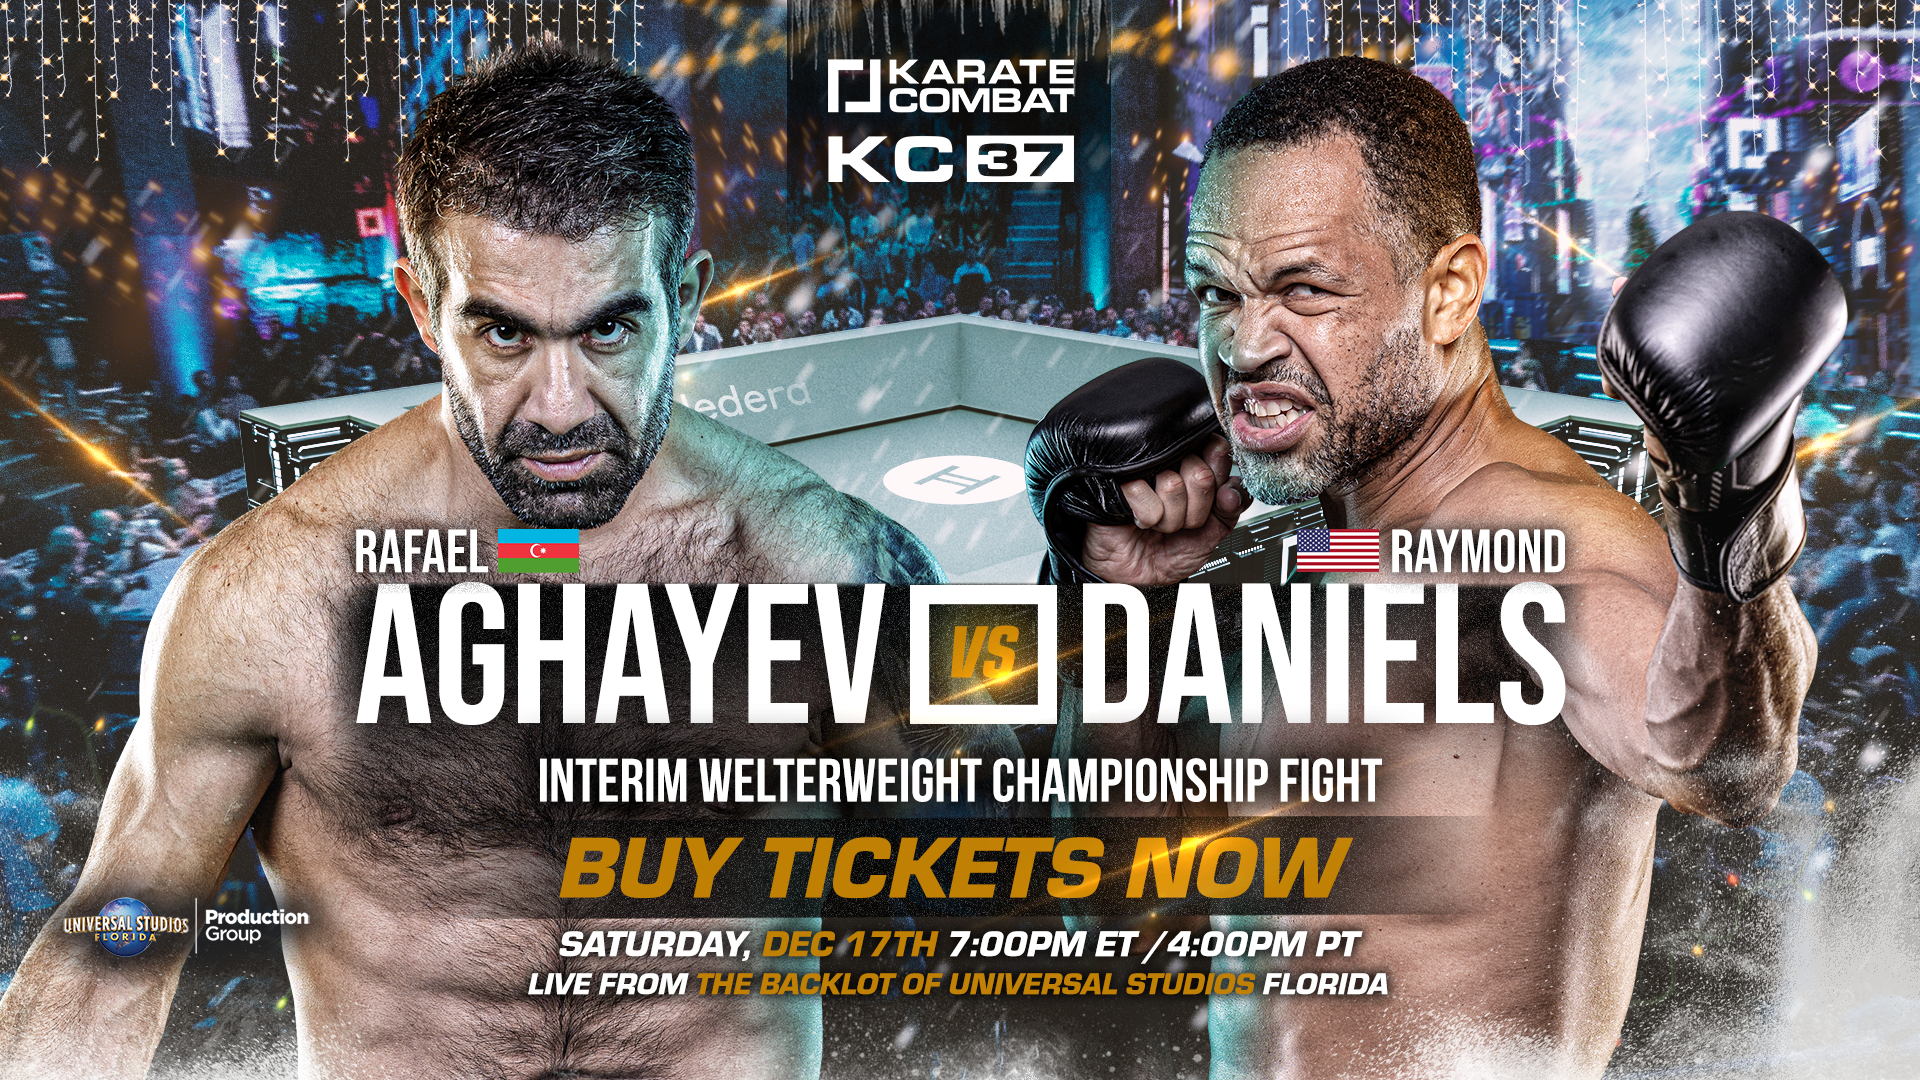 Raymond Daniels vs Rafael Aghayev has been confirmed as the main event of Karate Combat 37